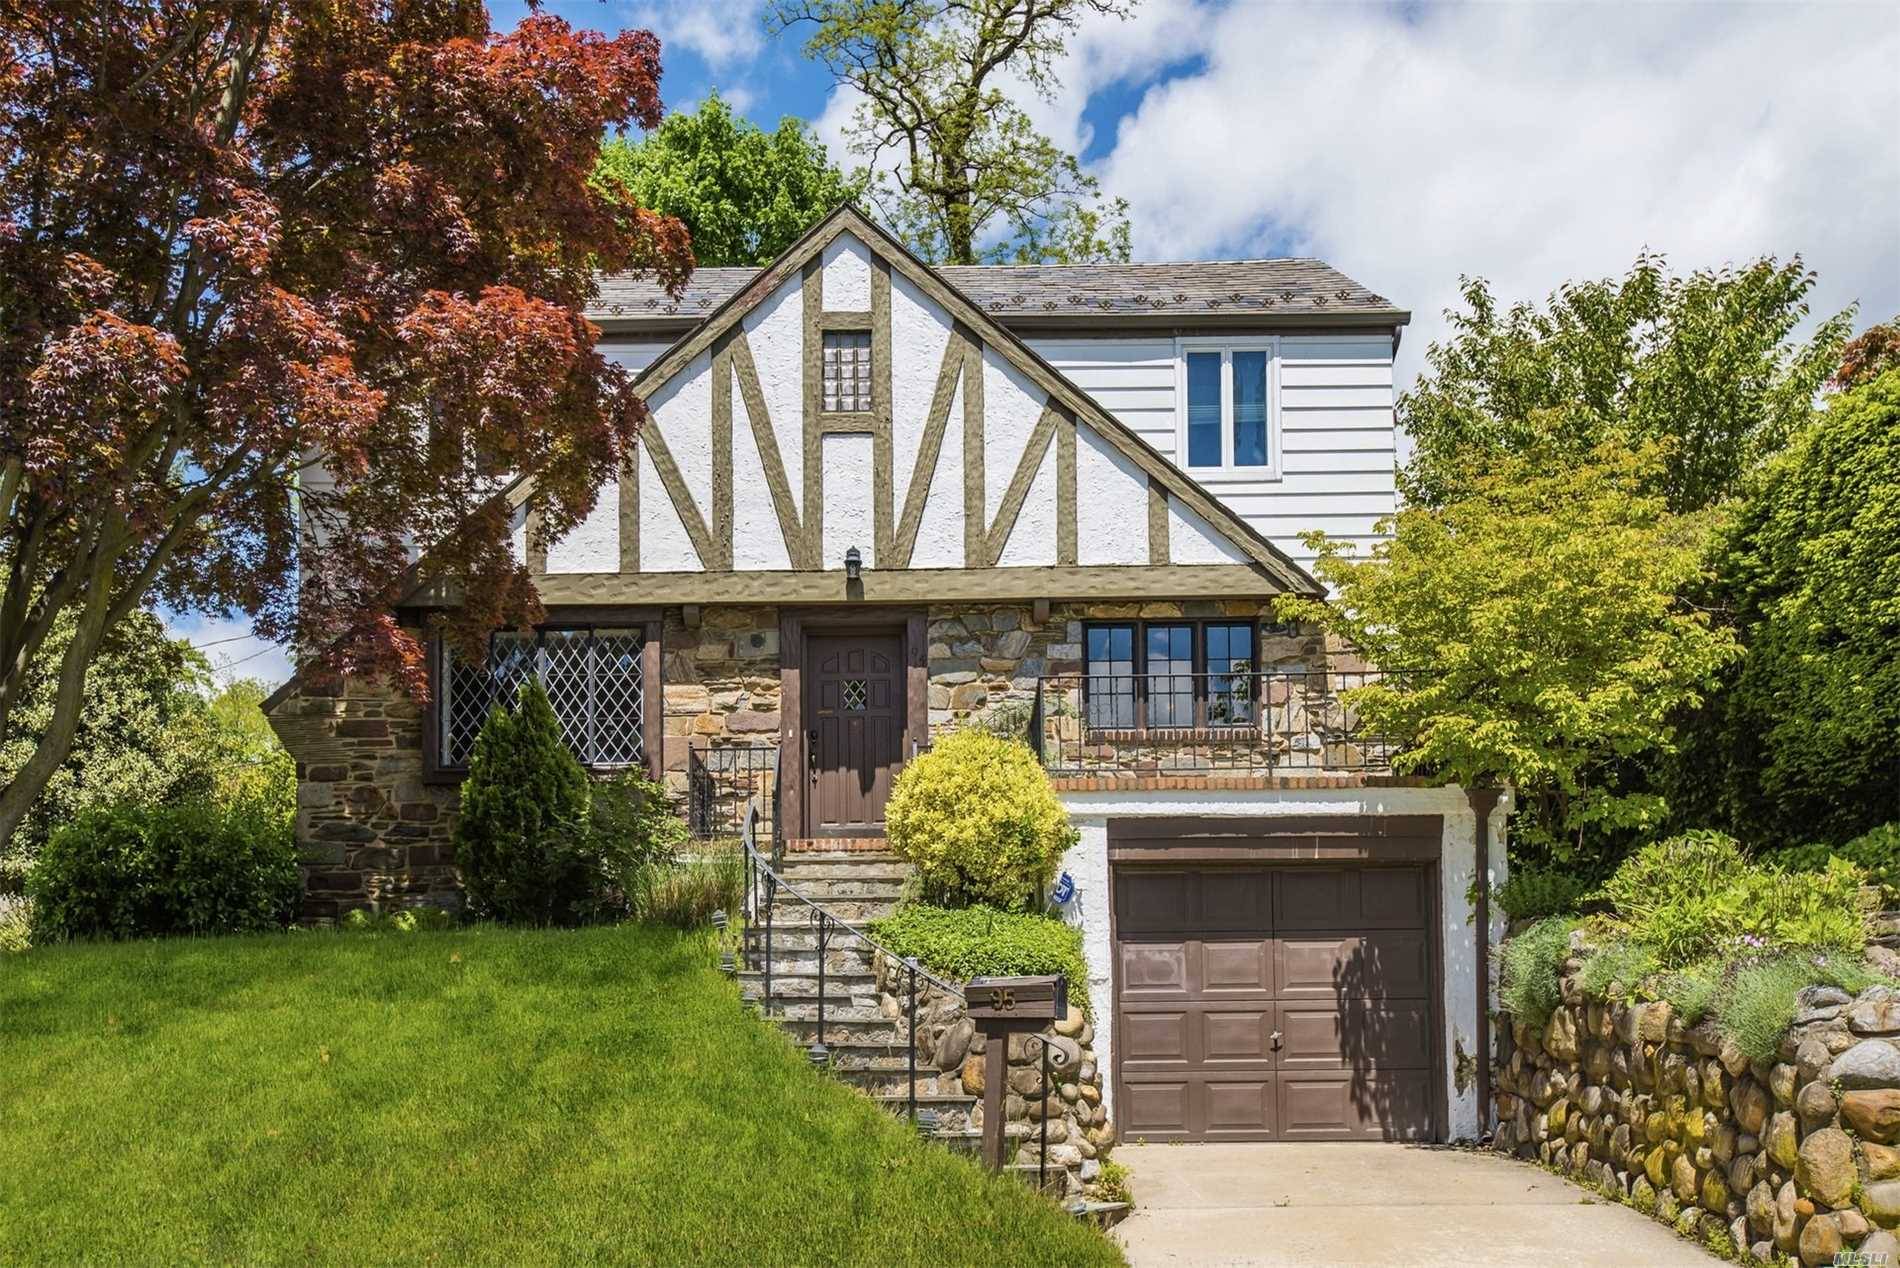 Another Price Reduction. Charming English Tudor featuring living room w fpl, formal dining room, eat in kitchen and powder room on main floor.